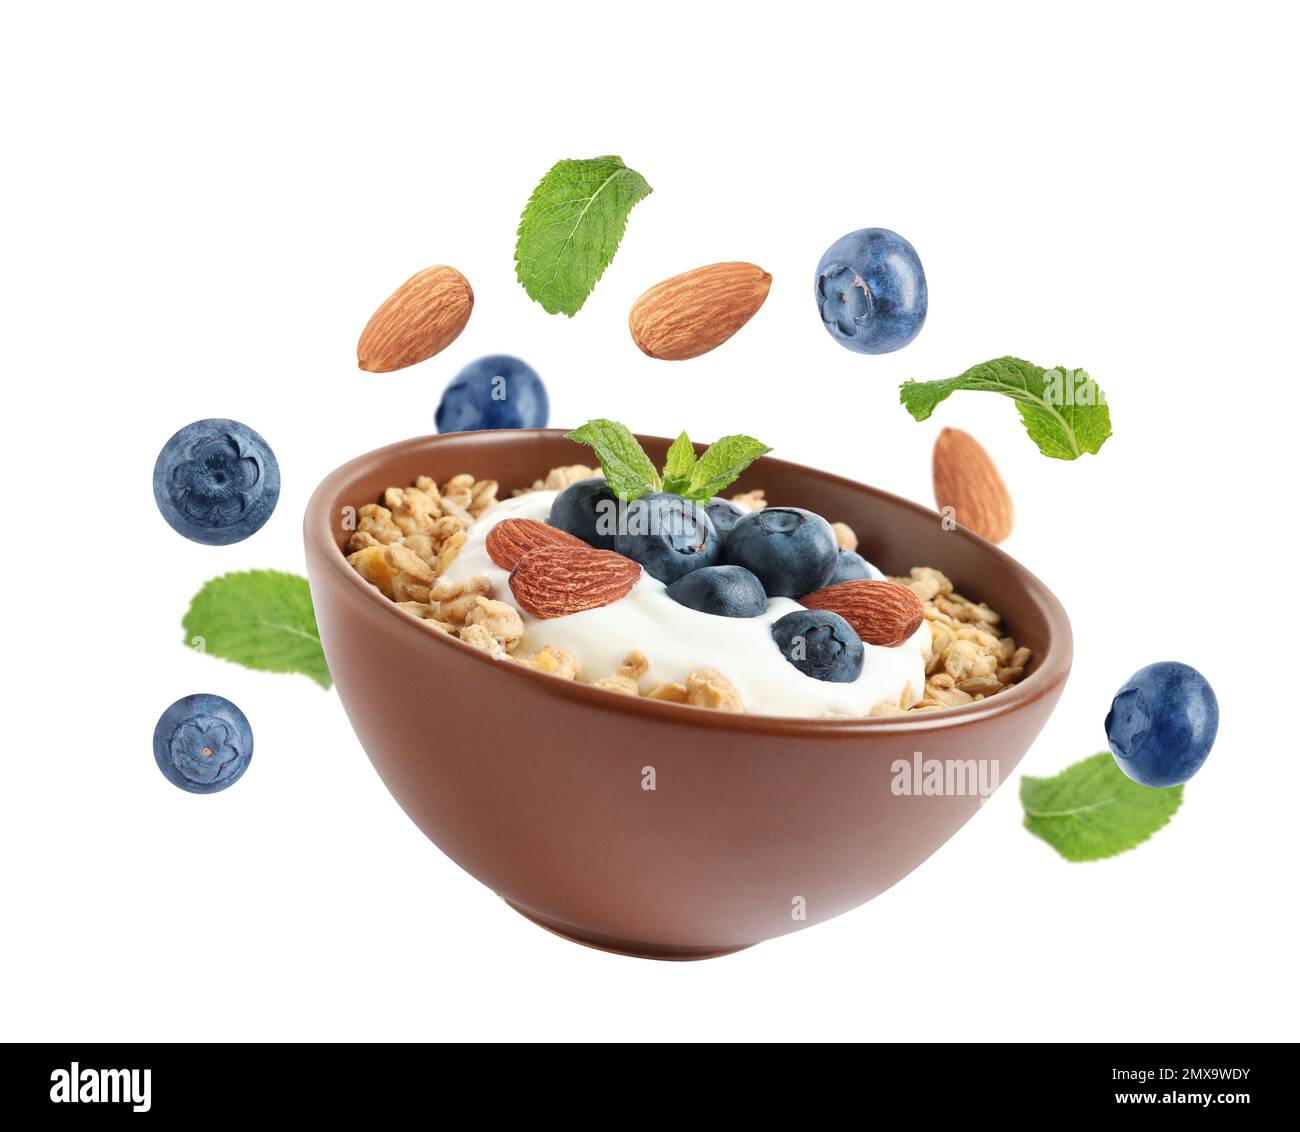 Tasty oatmeal with blueberries, yogurt and almond on white background Stock Photo